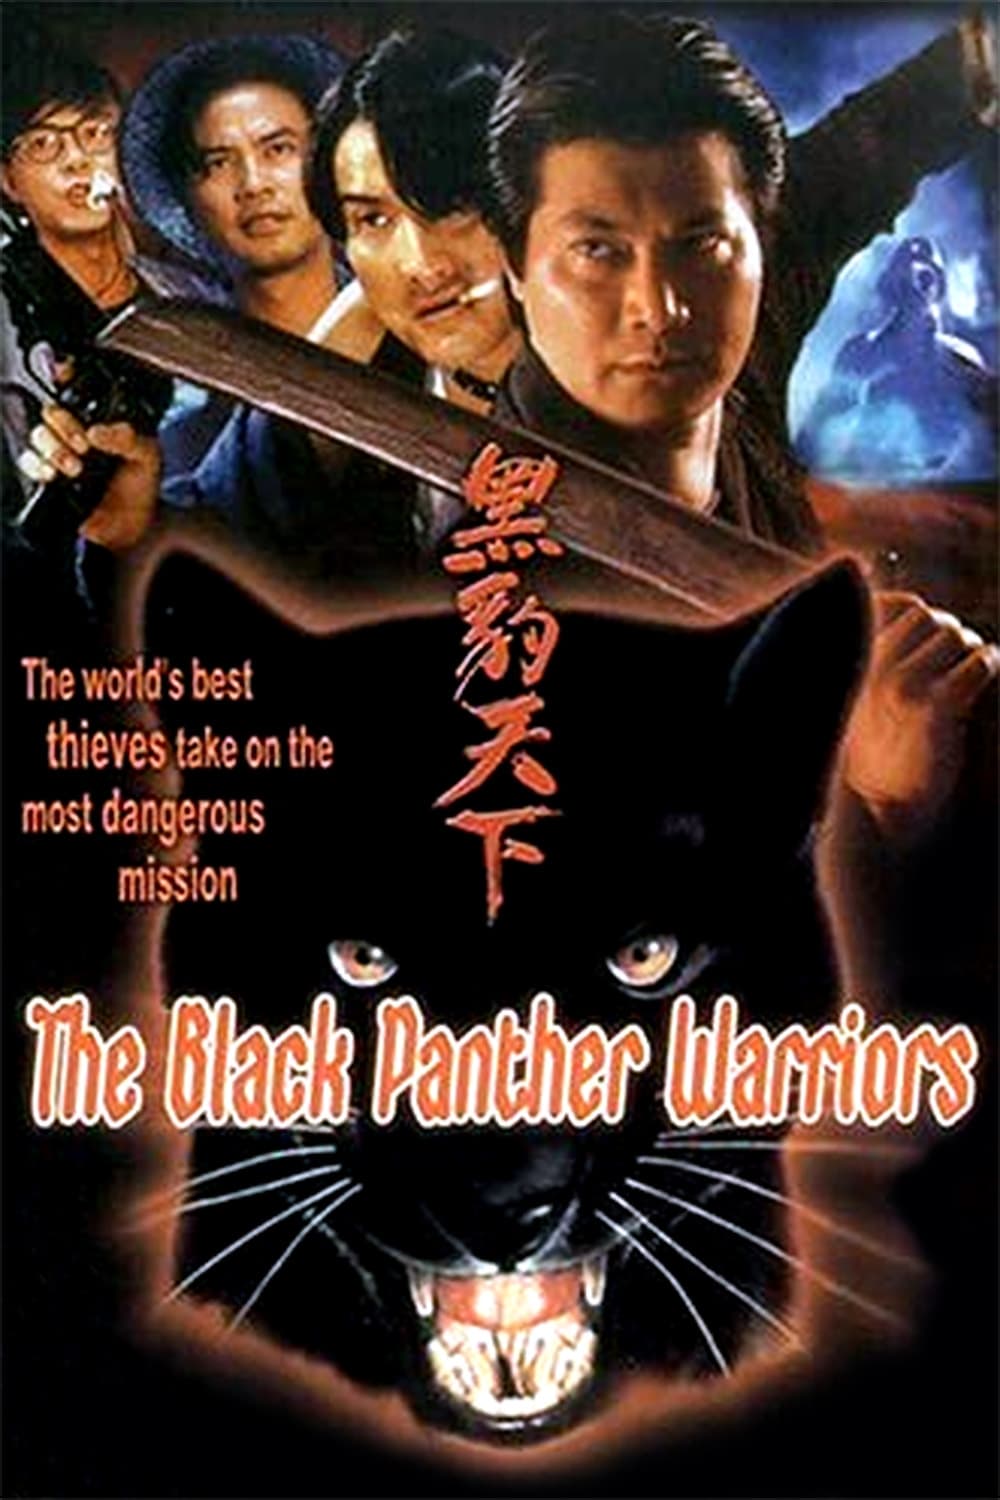 The Black Panther Warriors (1993)